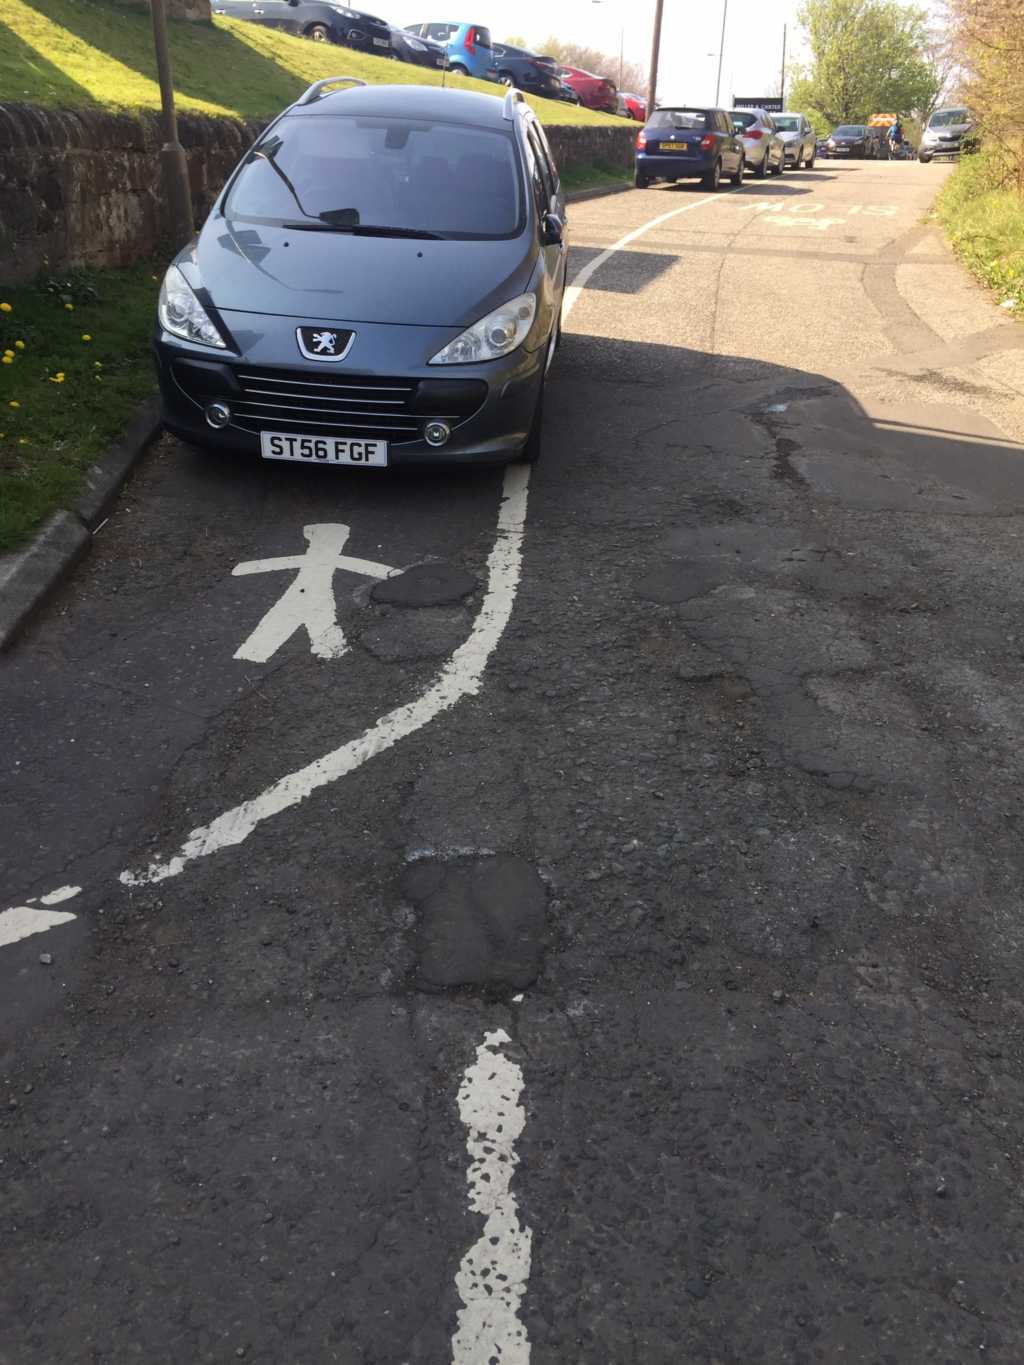 ST56 FGF  is an Inconsiderate Parker